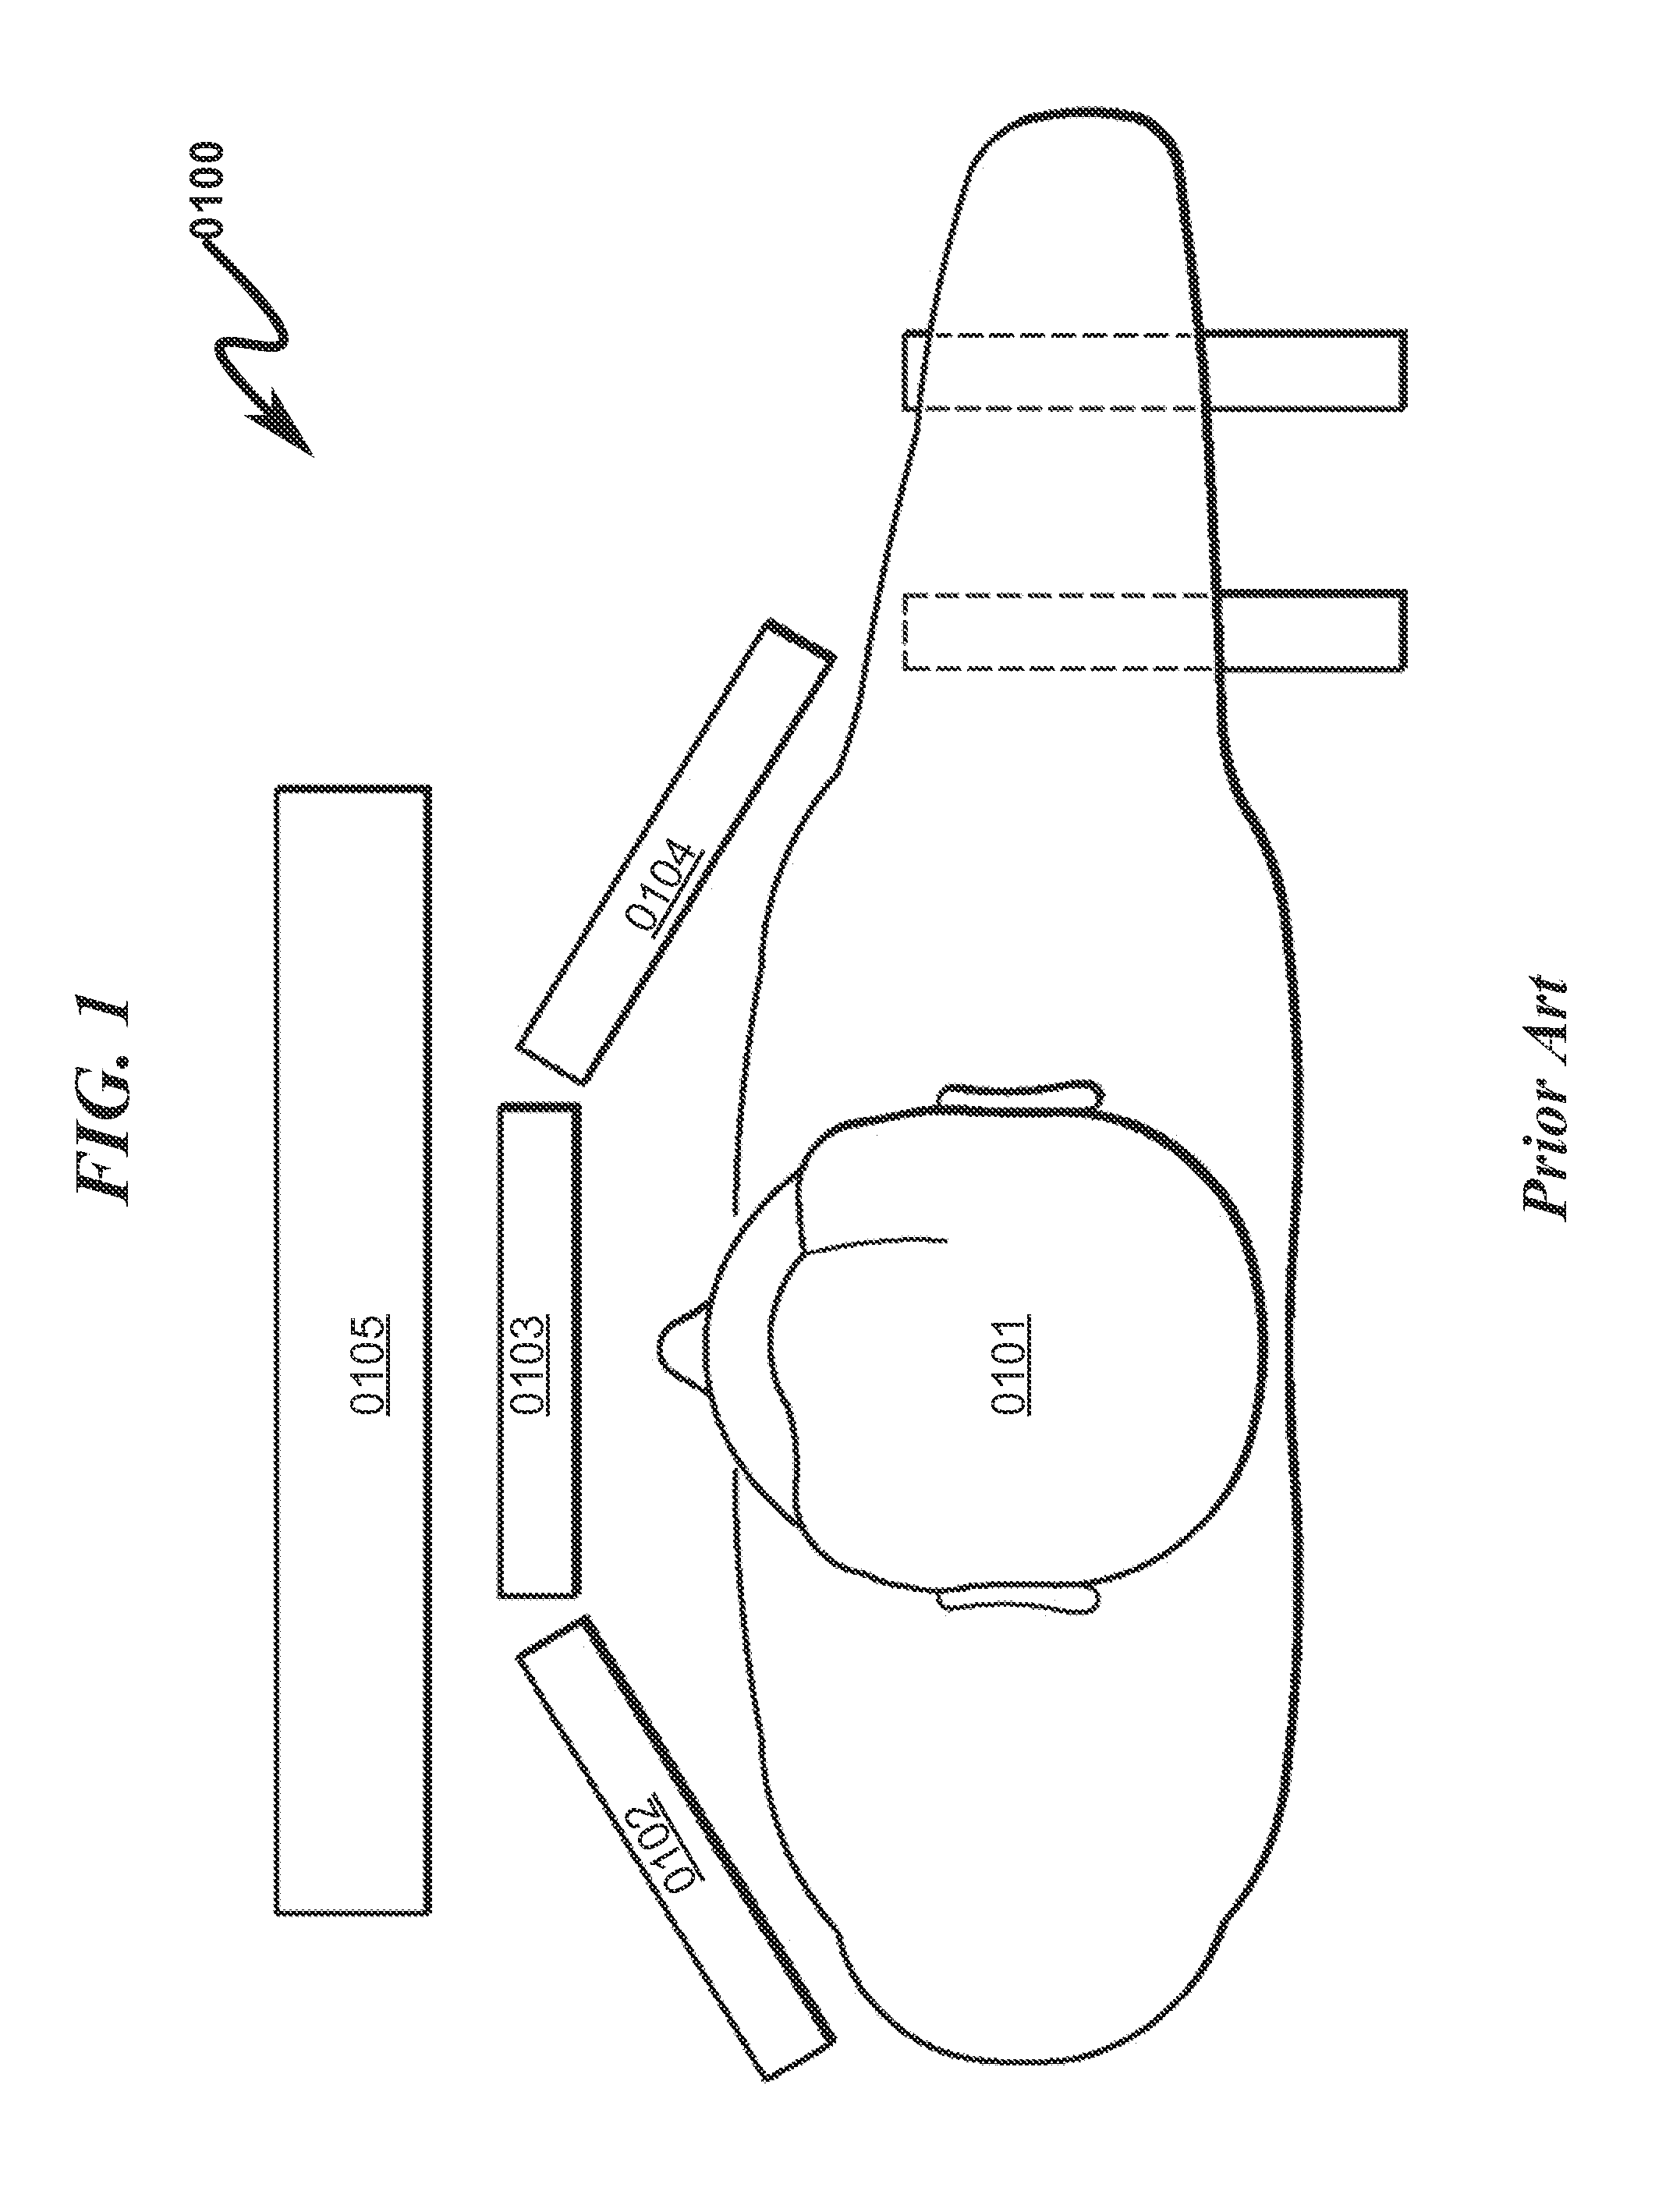 Radiation Detector System and Method